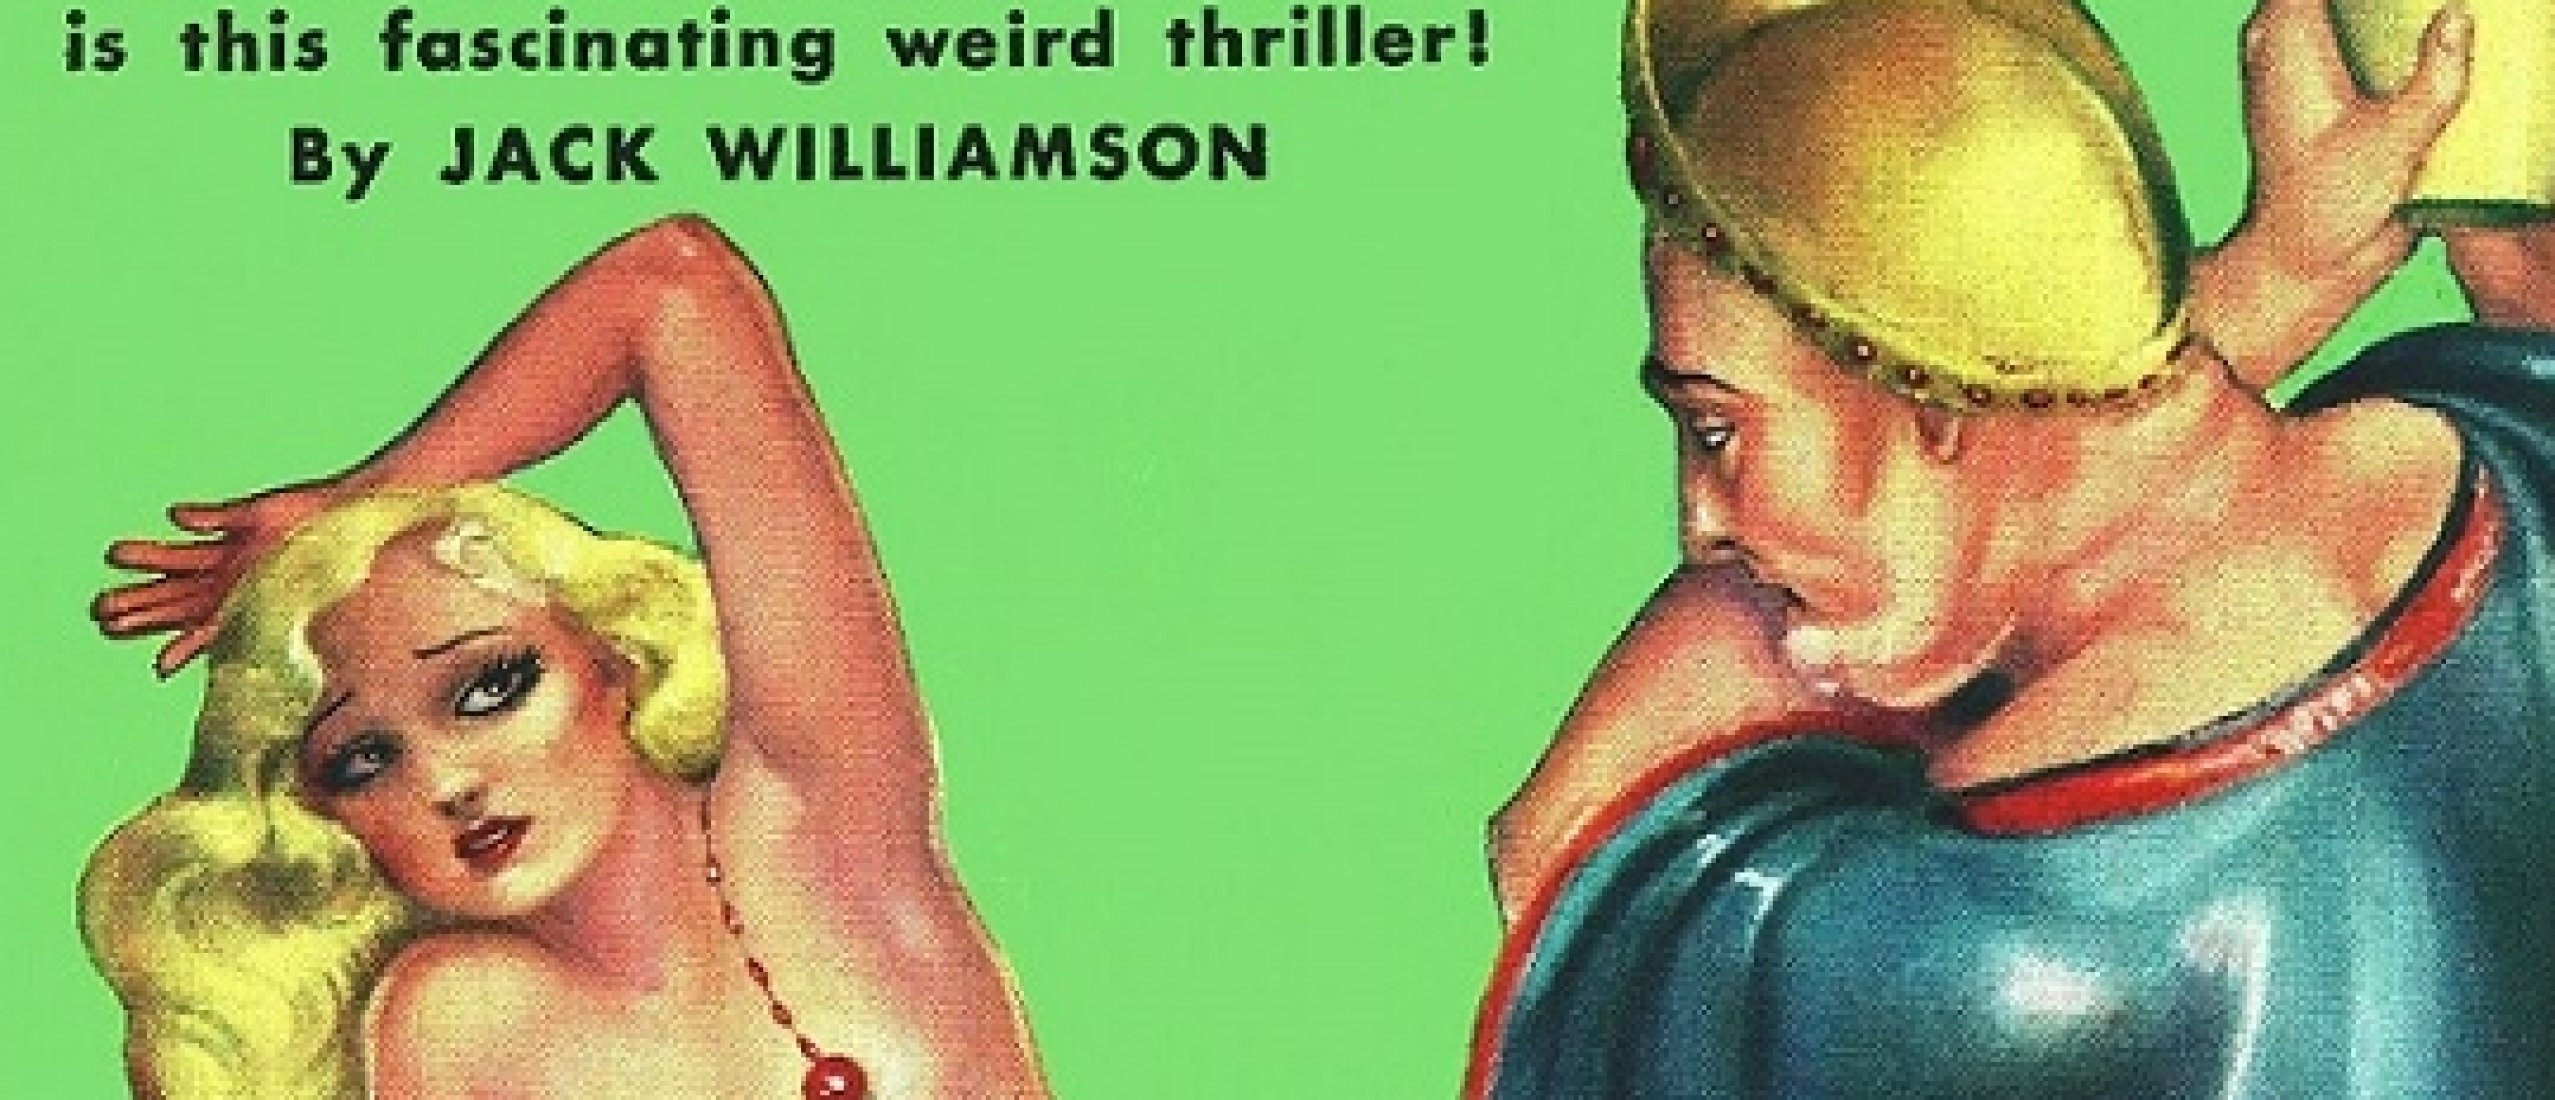 The Provocative 30s Pulp Cover Art of Margaret Brundage